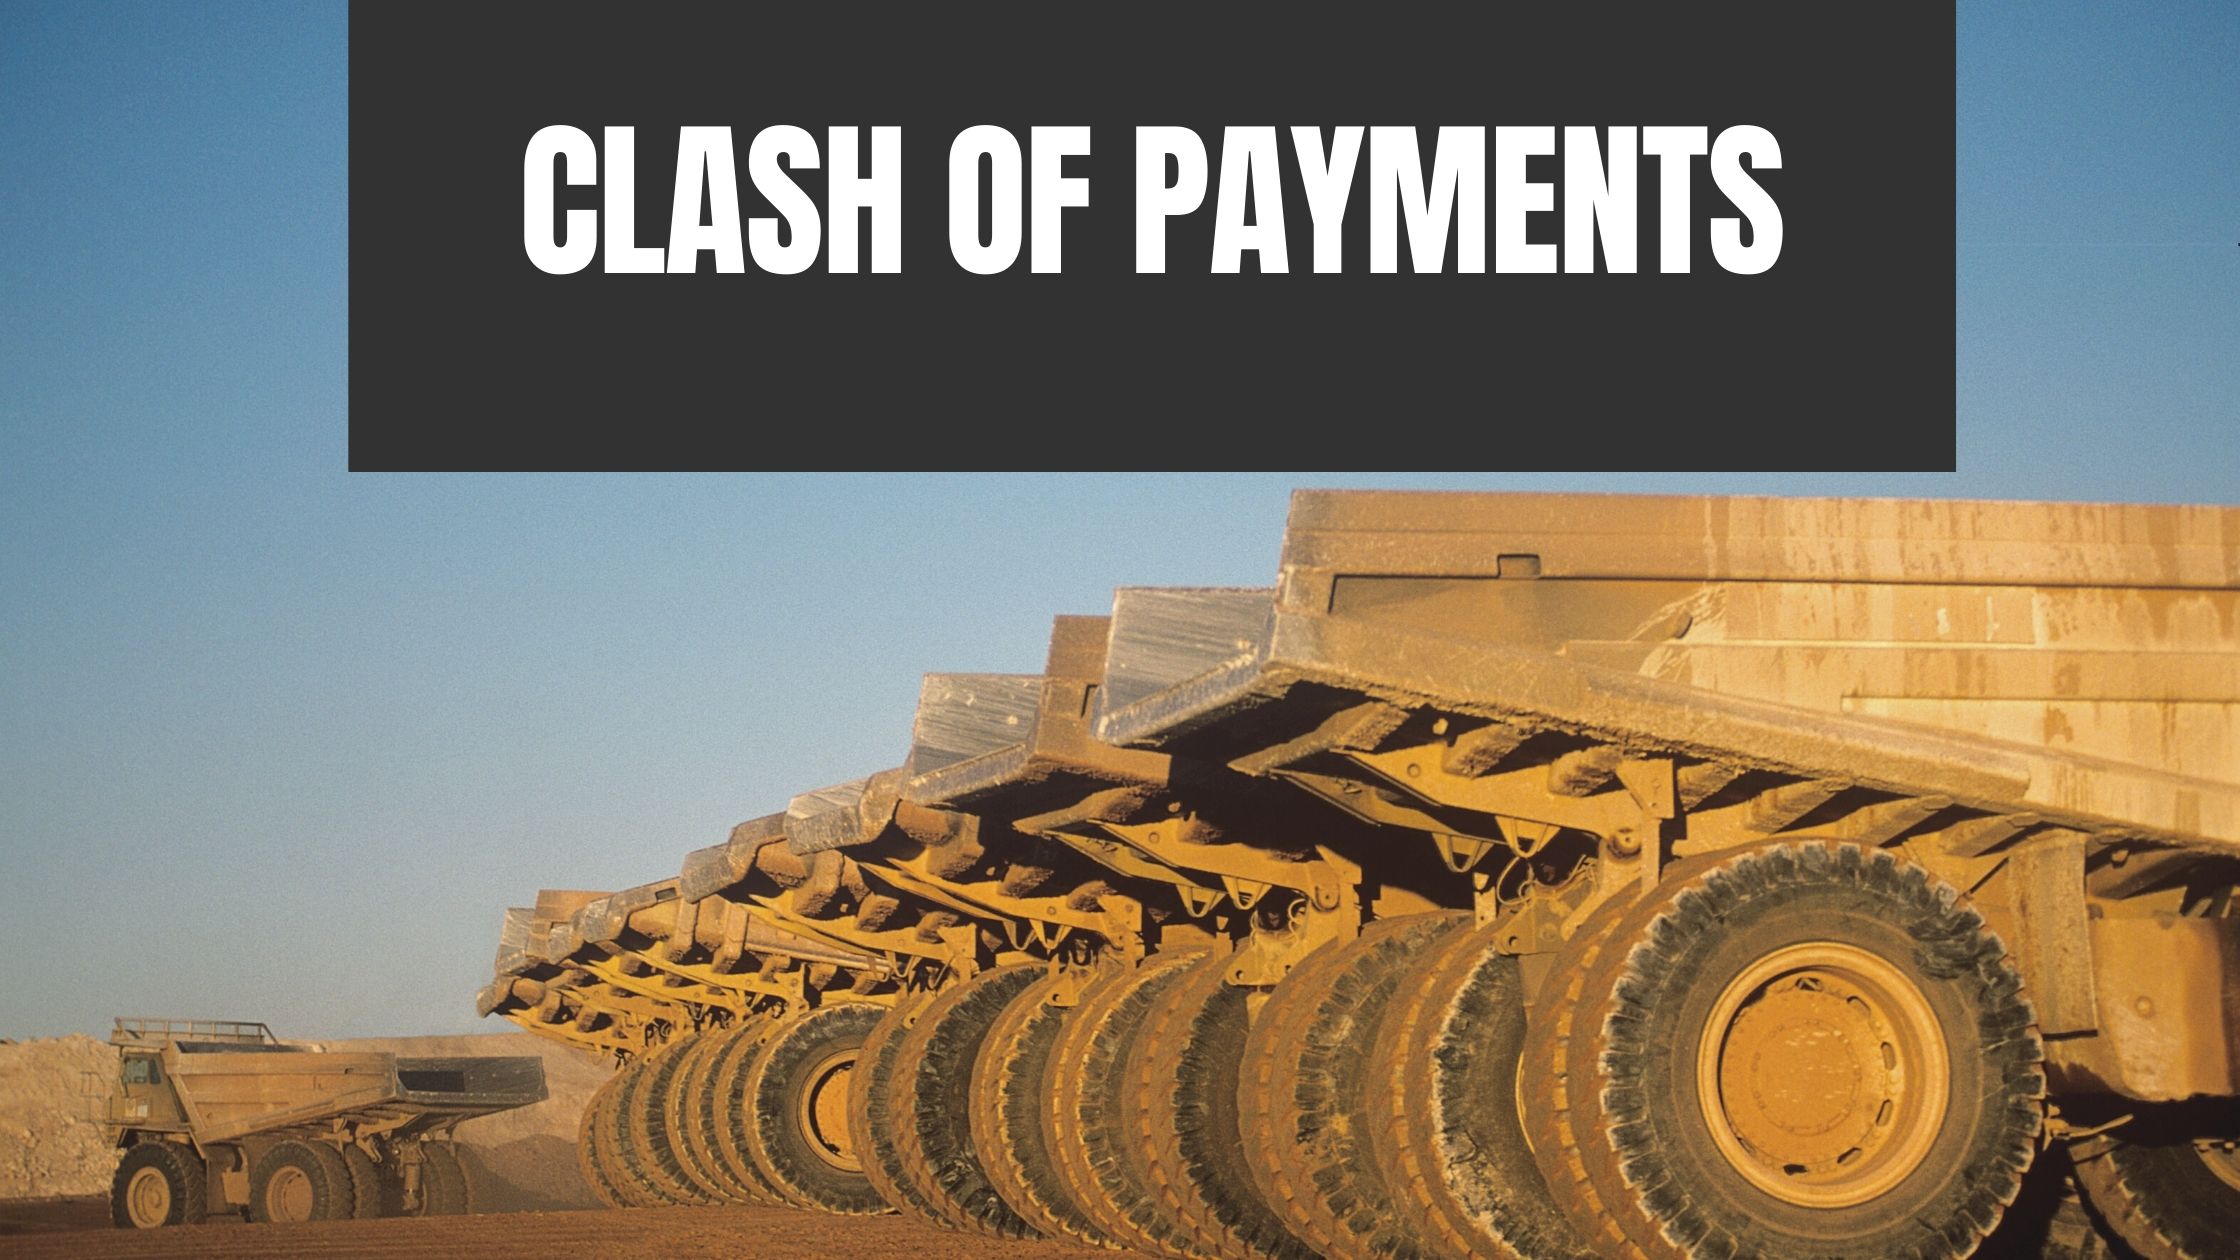 Clash of payments